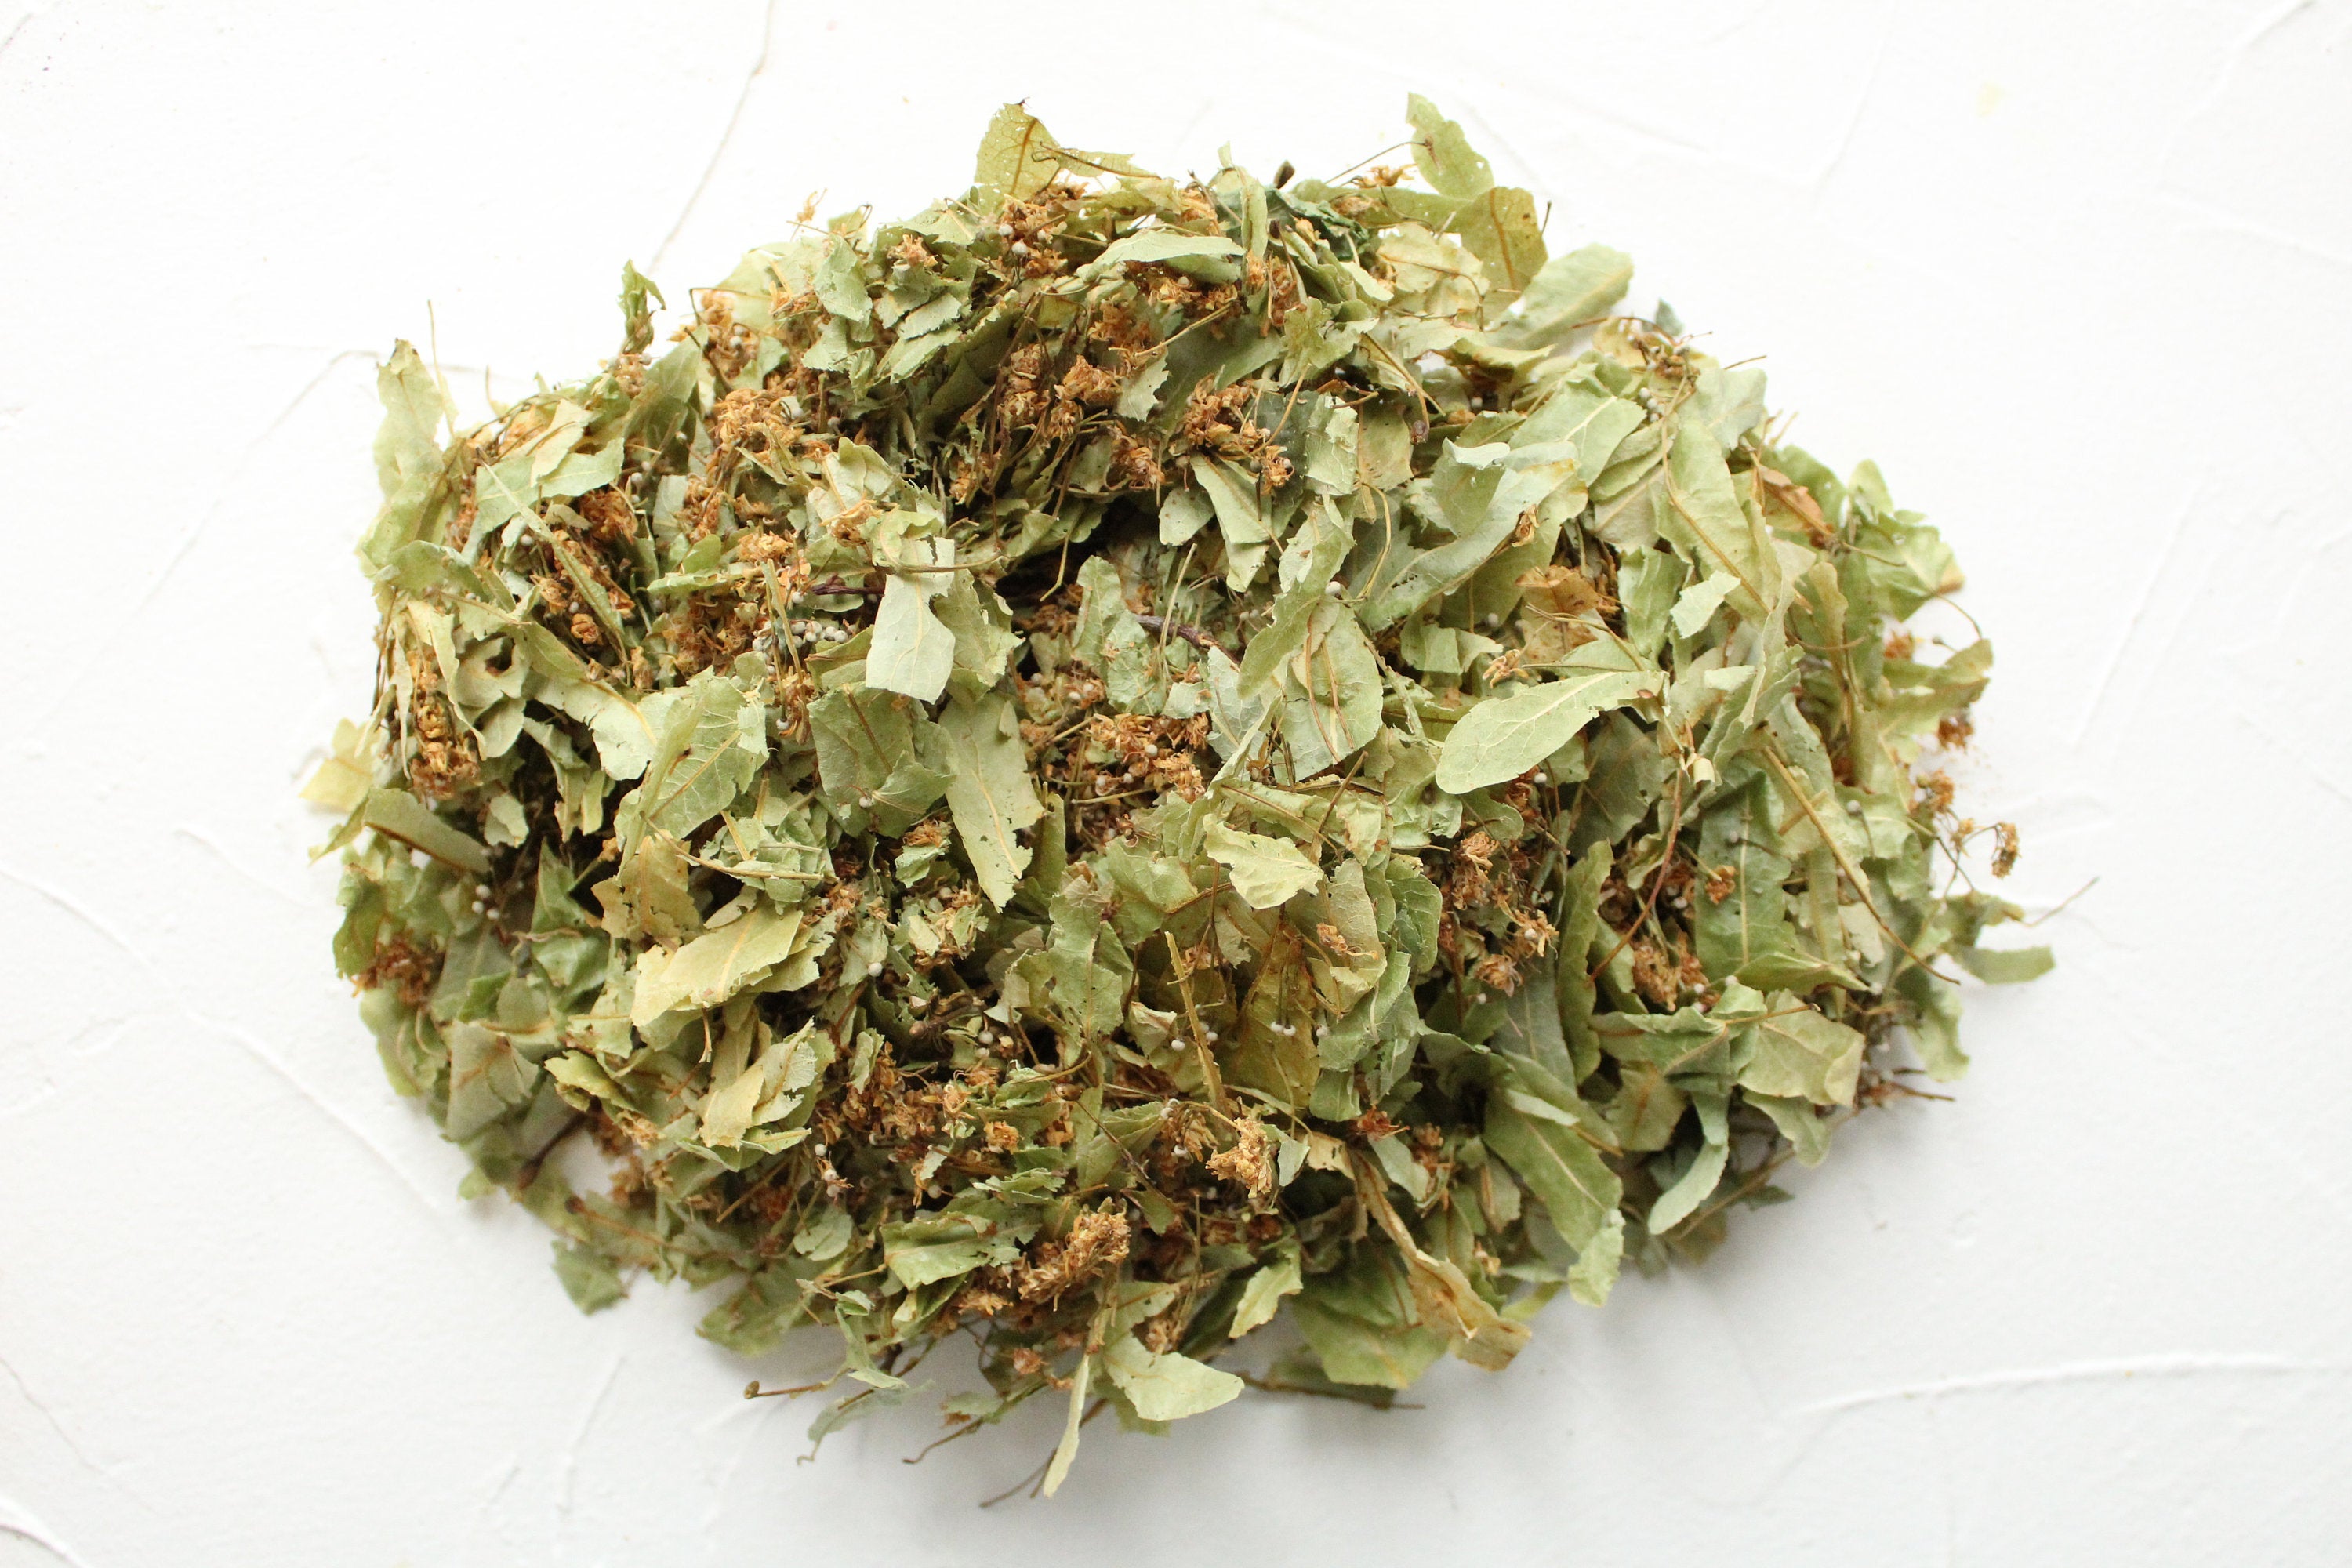 250 grams of Handpicked Linden flowers, Dried, Not cut, High Quality, Natural, Organic, Biodegraddable, Craft